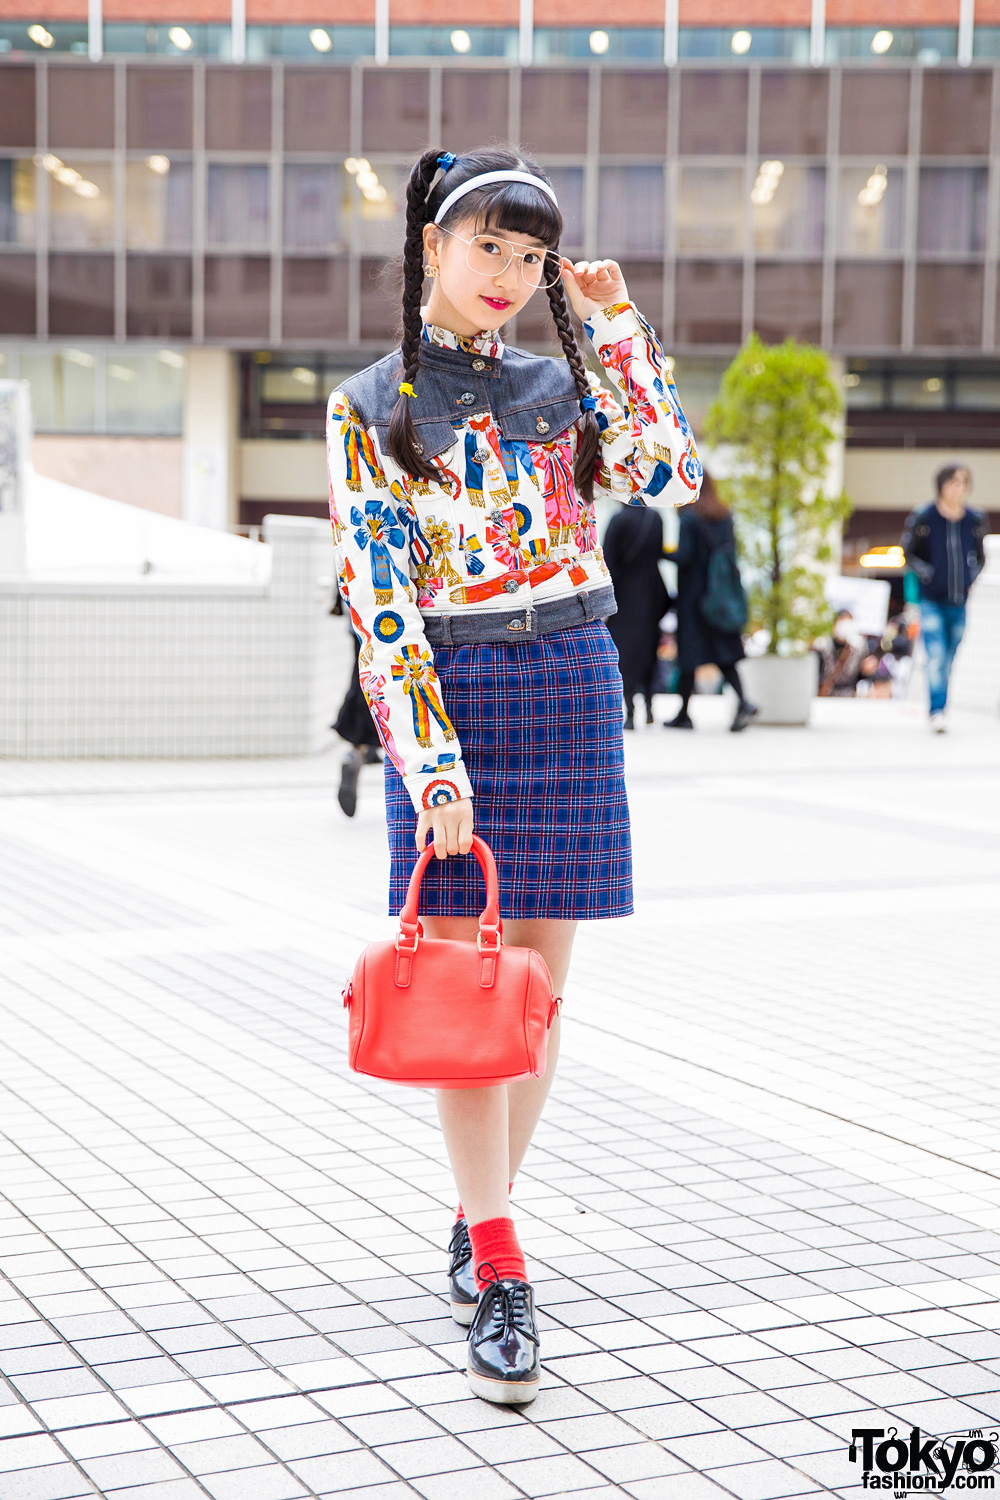 Japanese Model/Actress A-Pon in Vintage Mixed Prints Street Style & Chanel Earrings